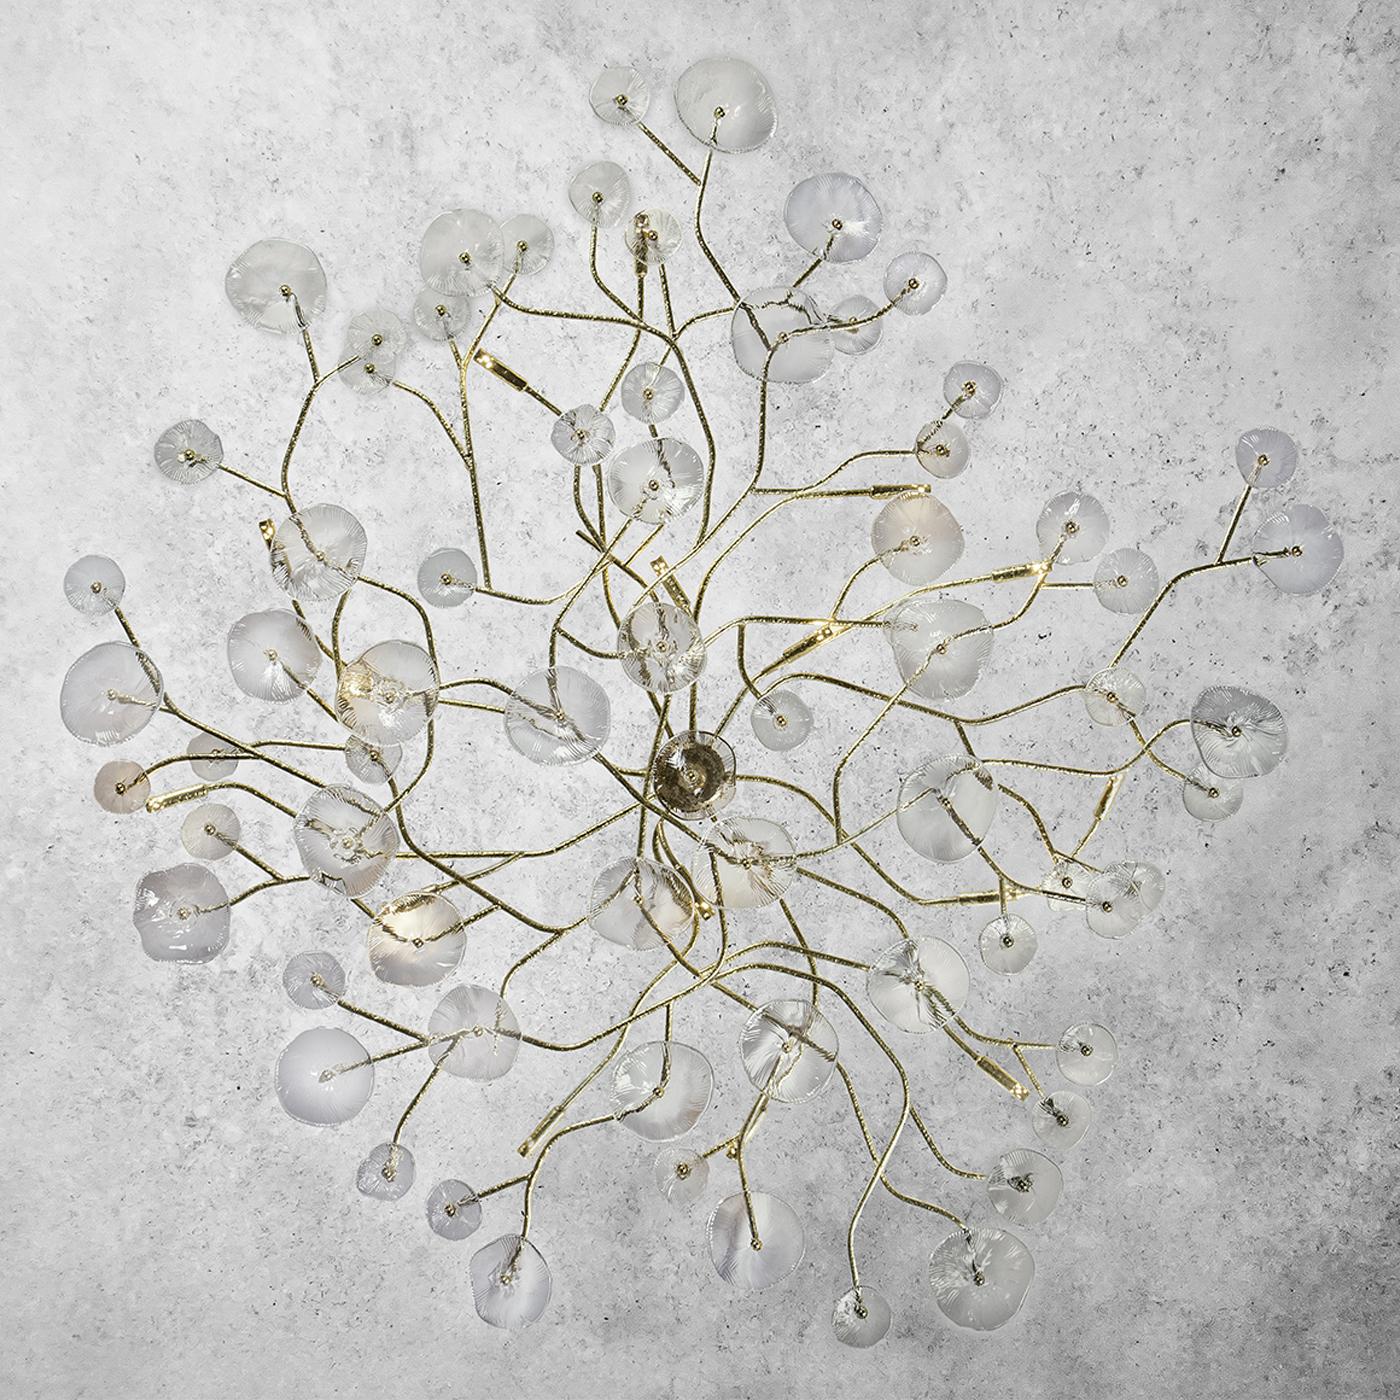 Contemporary In Bloom Phytomorphic Ceiling Lamp #1 For Sale